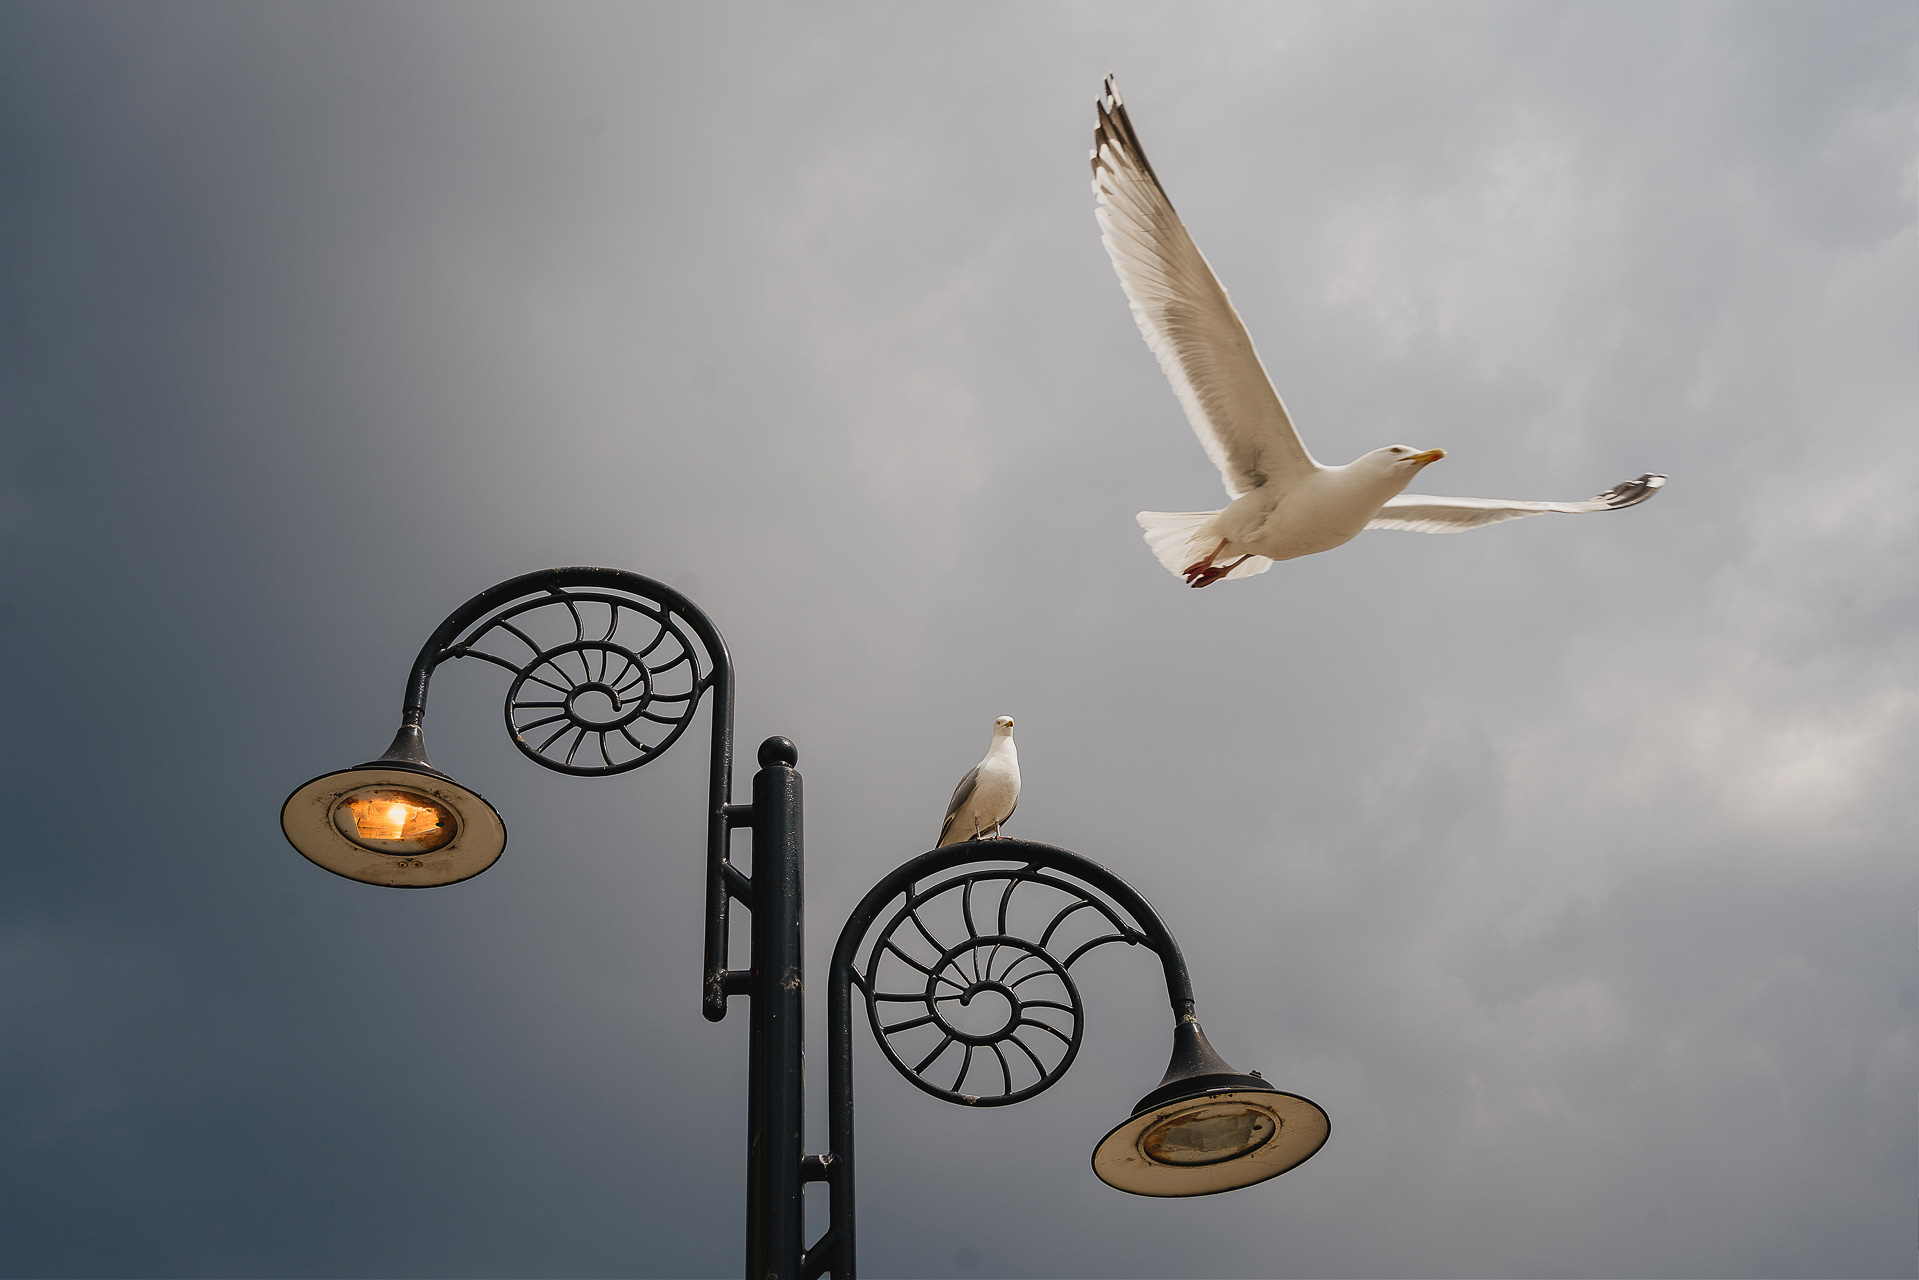 Two seagulls by a fossil lamppost, one flying through the air